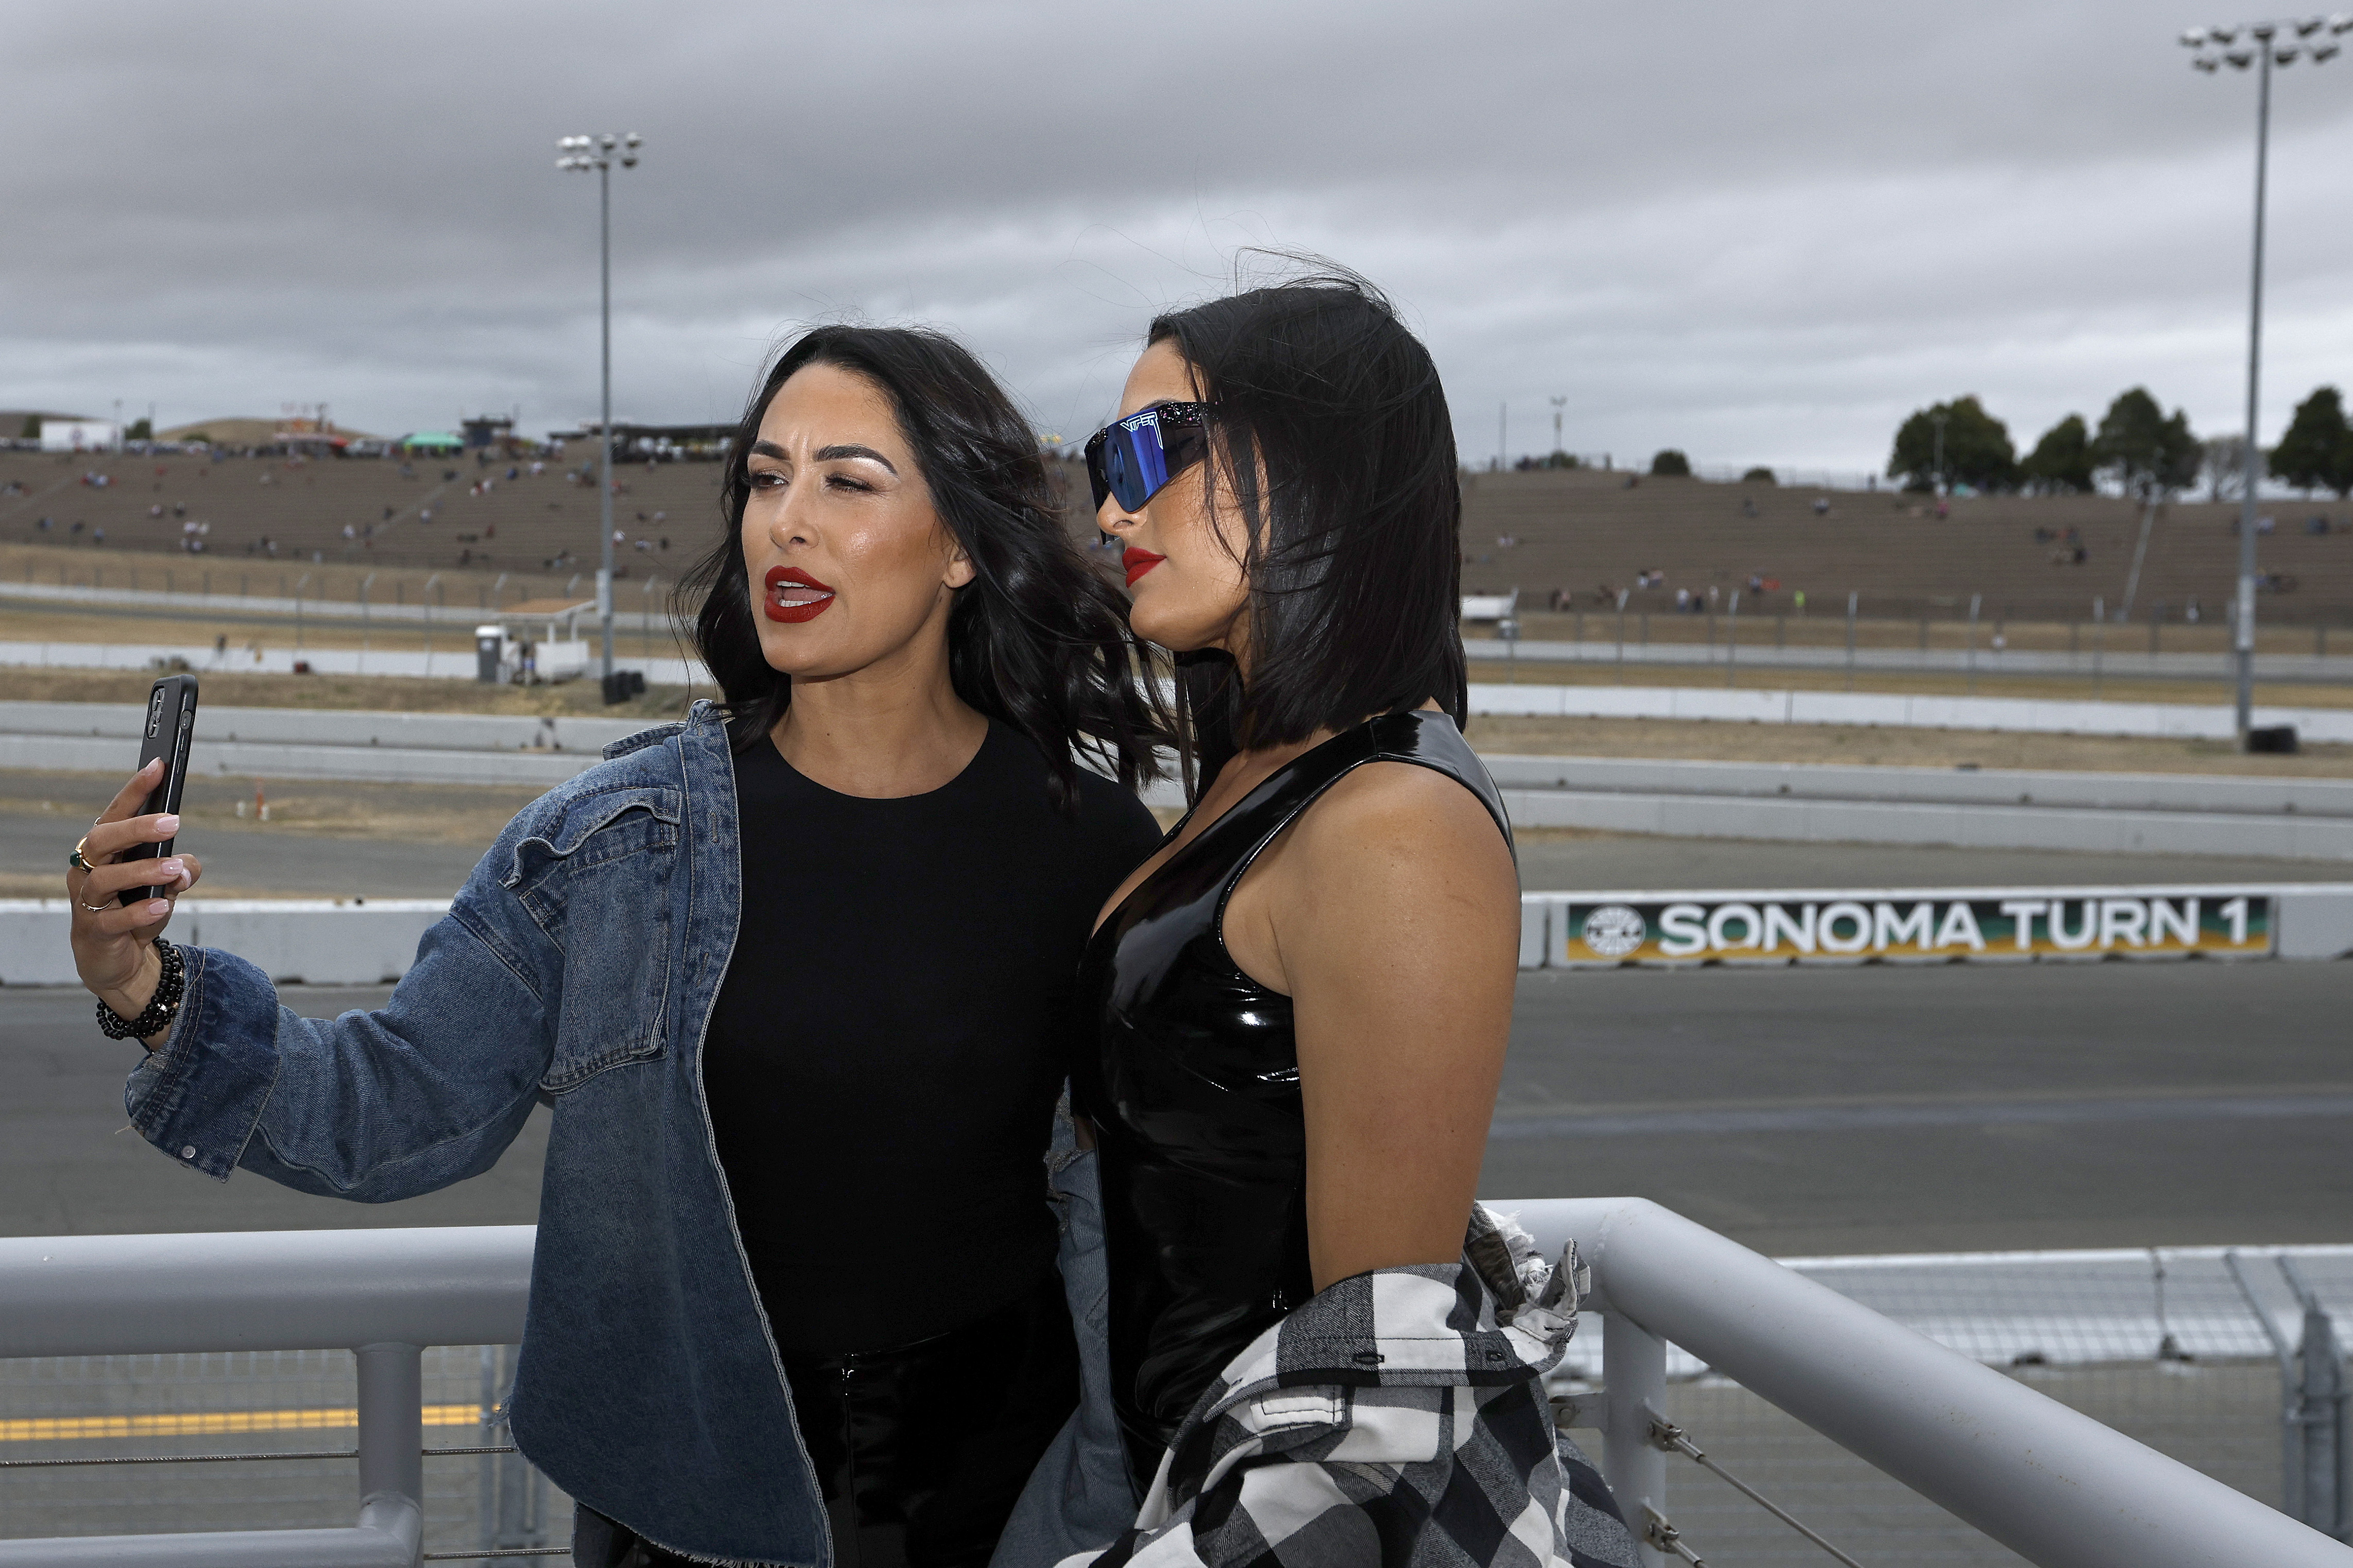 WWE wrestlers Brie Bella and Nikki Bella pose for photos on the midway prior to the NASCAR Cup Series Toyota/Save Mart 350 at Sonoma Raceway on June 12, 2022 in Sonoma, California.